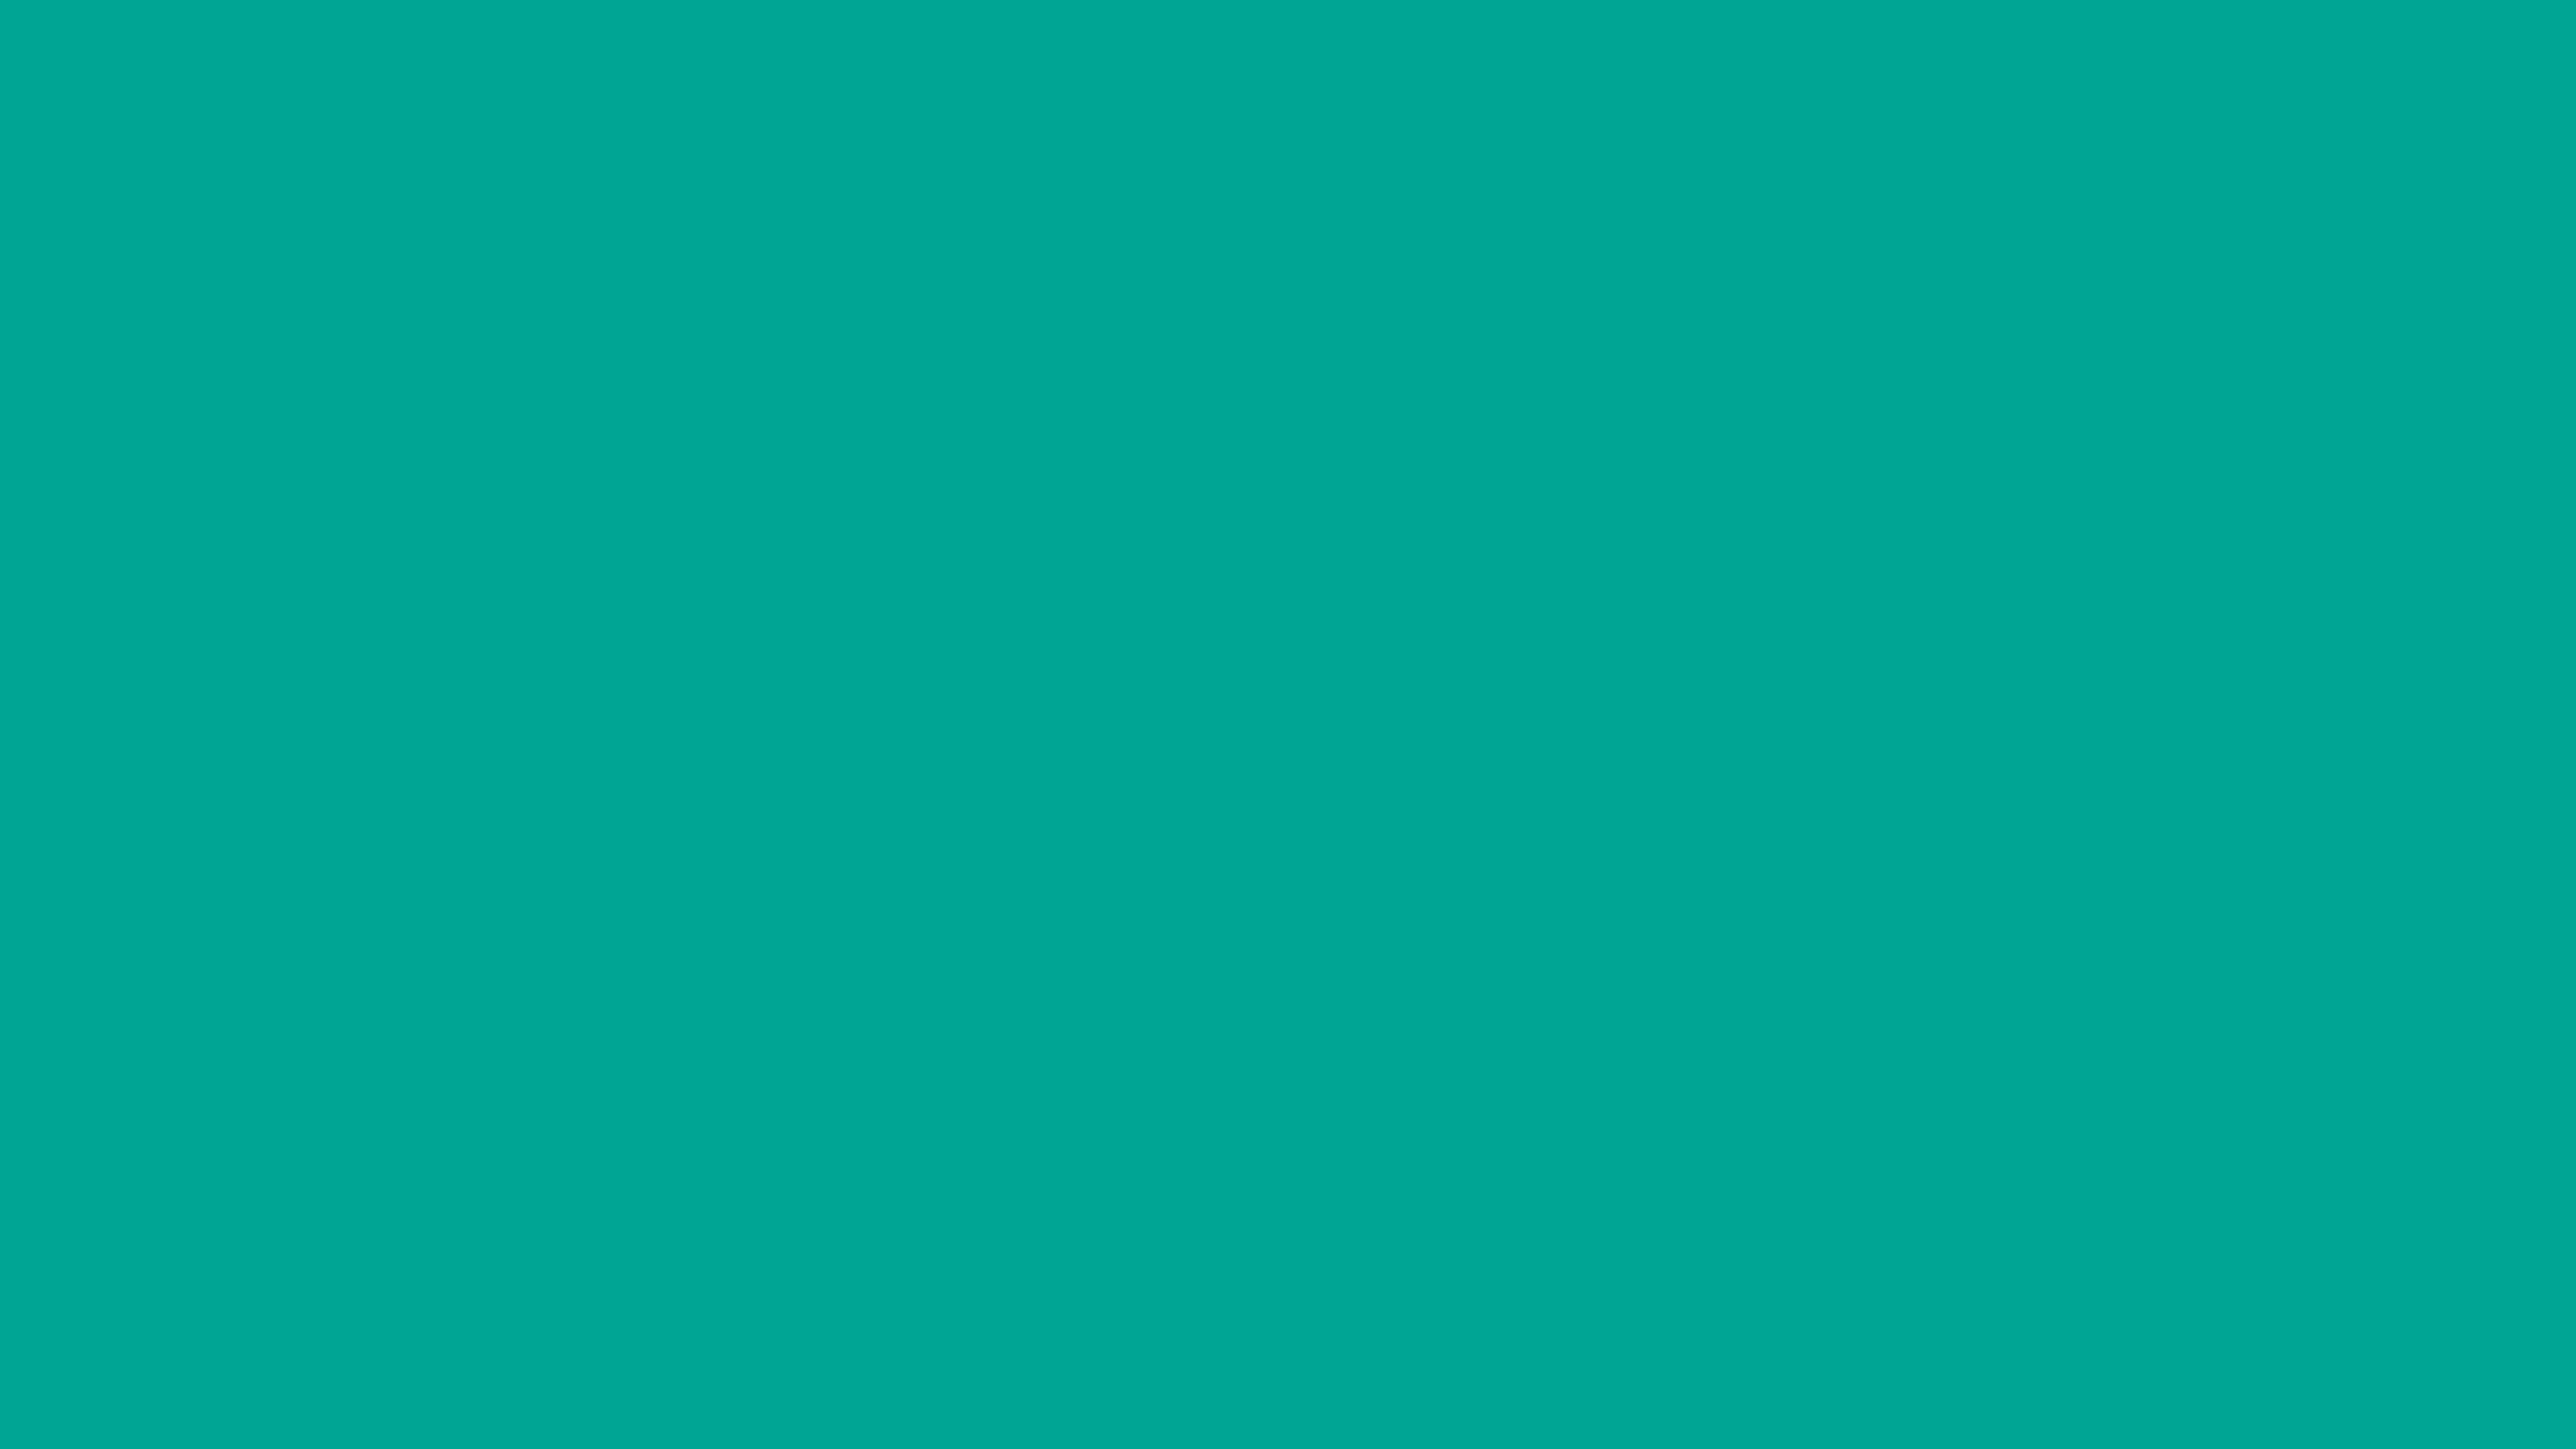 7680x4320 Persian Green Solid Color Background